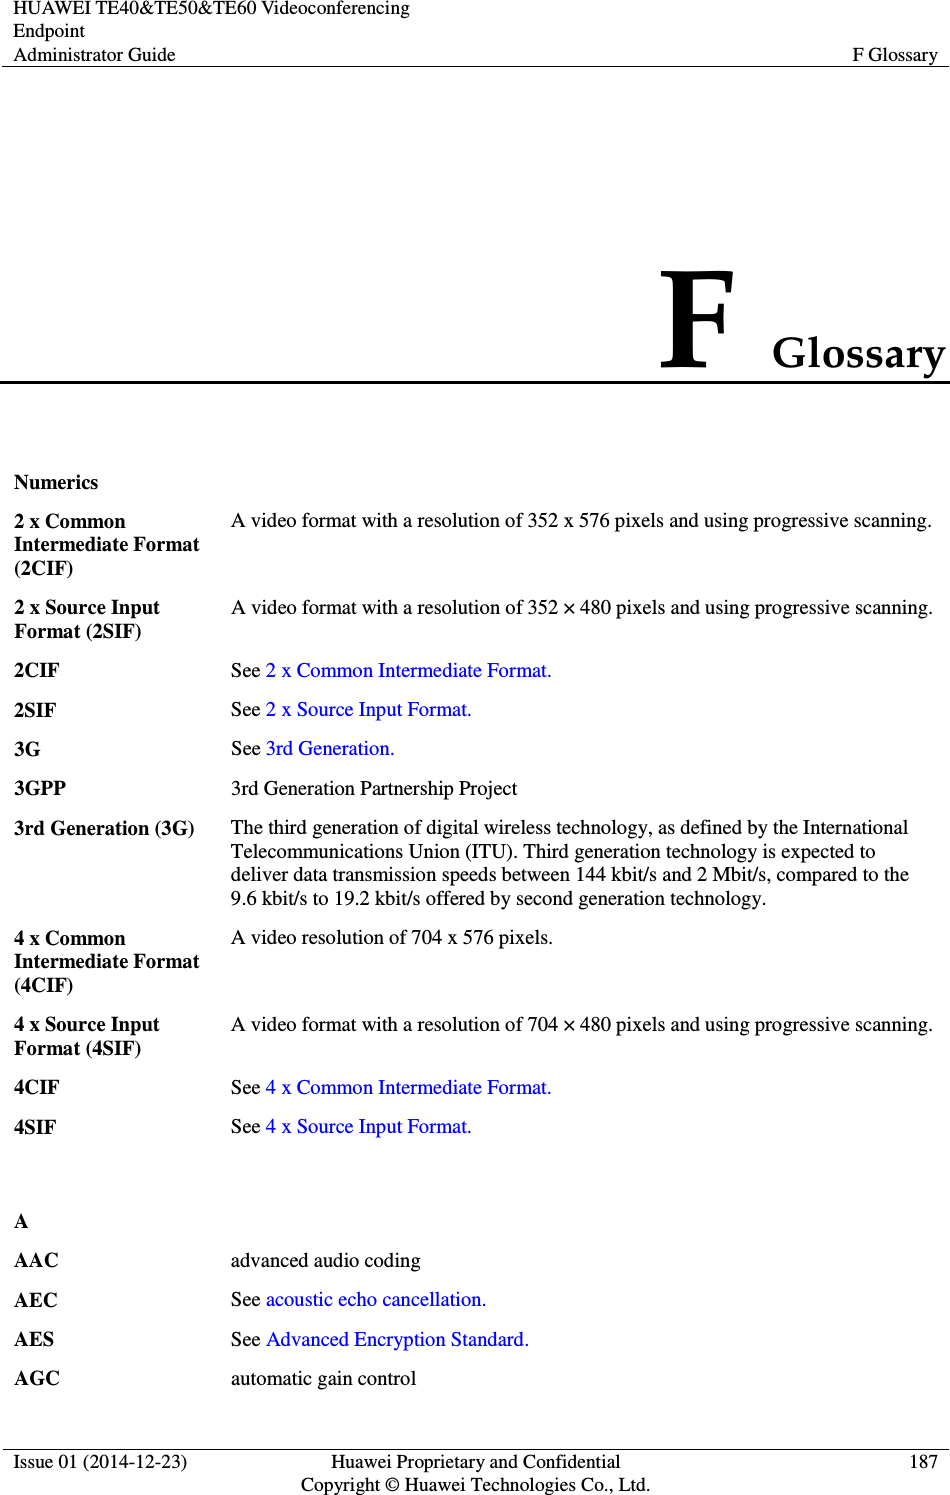 HUAWEI TE40&amp;TE50&amp;TE60 Videoconferencing Endpoint Administrator Guide  F Glossary  Issue 01 (2014-12-23)  Huawei Proprietary and Confidential                                     Copyright © Huawei Technologies Co., Ltd. 187  F Glossary Numerics  2 x Common Intermediate Format (2CIF) A video format with a resolution of 352 x 576 pixels and using progressive scanning. 2 x Source Input Format (2SIF) A video format with a resolution of 352 × 480 pixels and using progressive scanning. 2CIF See 2 x Common Intermediate Format. 2SIF See 2 x Source Input Format. 3G See 3rd Generation. 3GPP 3rd Generation Partnership Project 3rd Generation (3G) The third generation of digital wireless technology, as defined by the International Telecommunications Union (ITU). Third generation technology is expected to deliver data transmission speeds between 144 kbit/s and 2 Mbit/s, compared to the 9.6 kbit/s to 19.2 kbit/s offered by second generation technology. 4 x Common Intermediate Format (4CIF) A video resolution of 704 x 576 pixels. 4 x Source Input Format (4SIF) A video format with a resolution of 704 × 480 pixels and using progressive scanning. 4CIF See 4 x Common Intermediate Format. 4SIF See 4 x Source Input Format.   A  AAC advanced audio coding AEC See acoustic echo cancellation. AES See Advanced Encryption Standard. AGC automatic gain control 